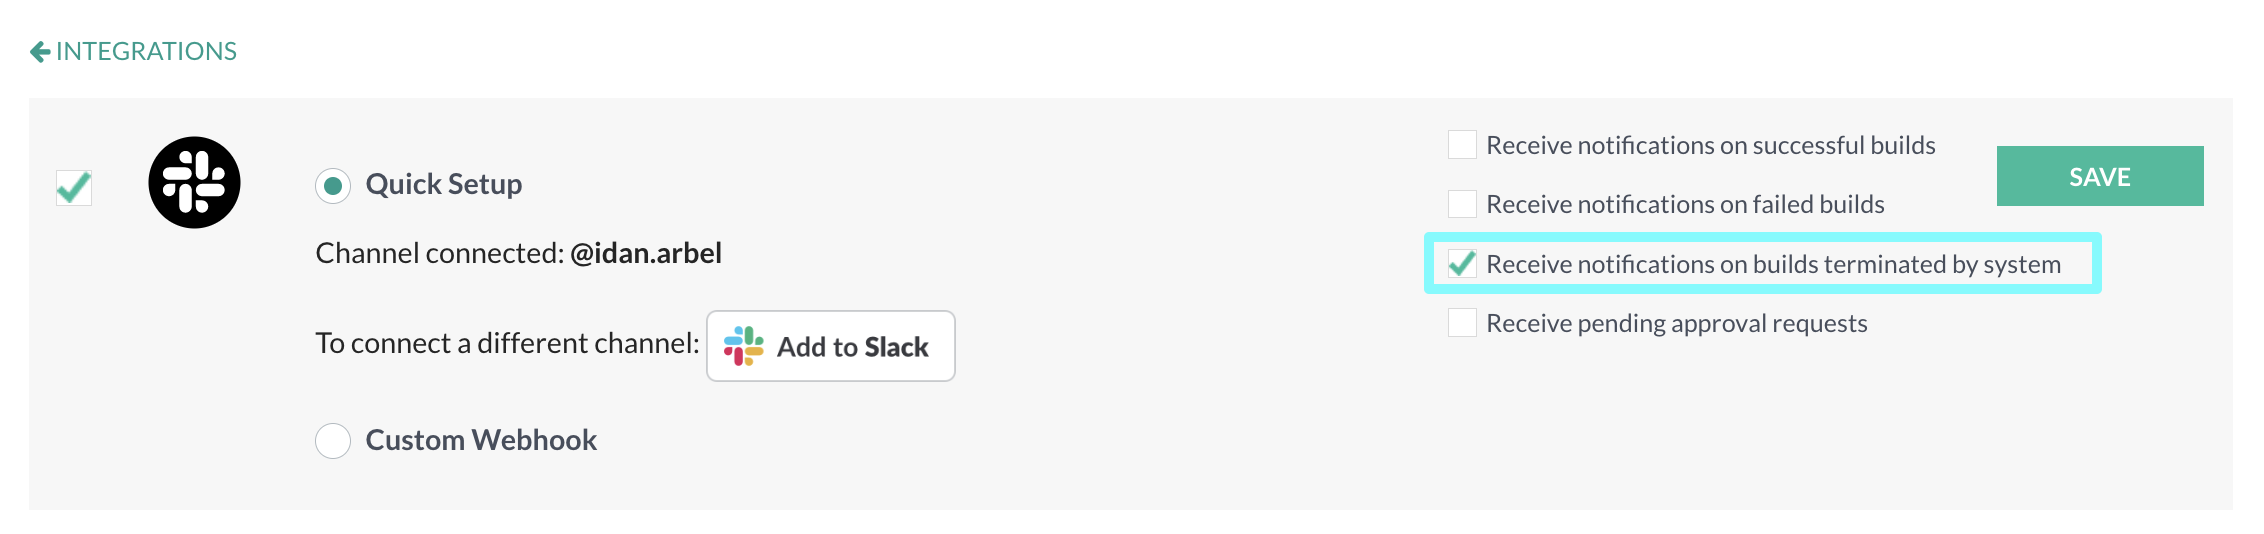 Slack notification option for system-terminated builds